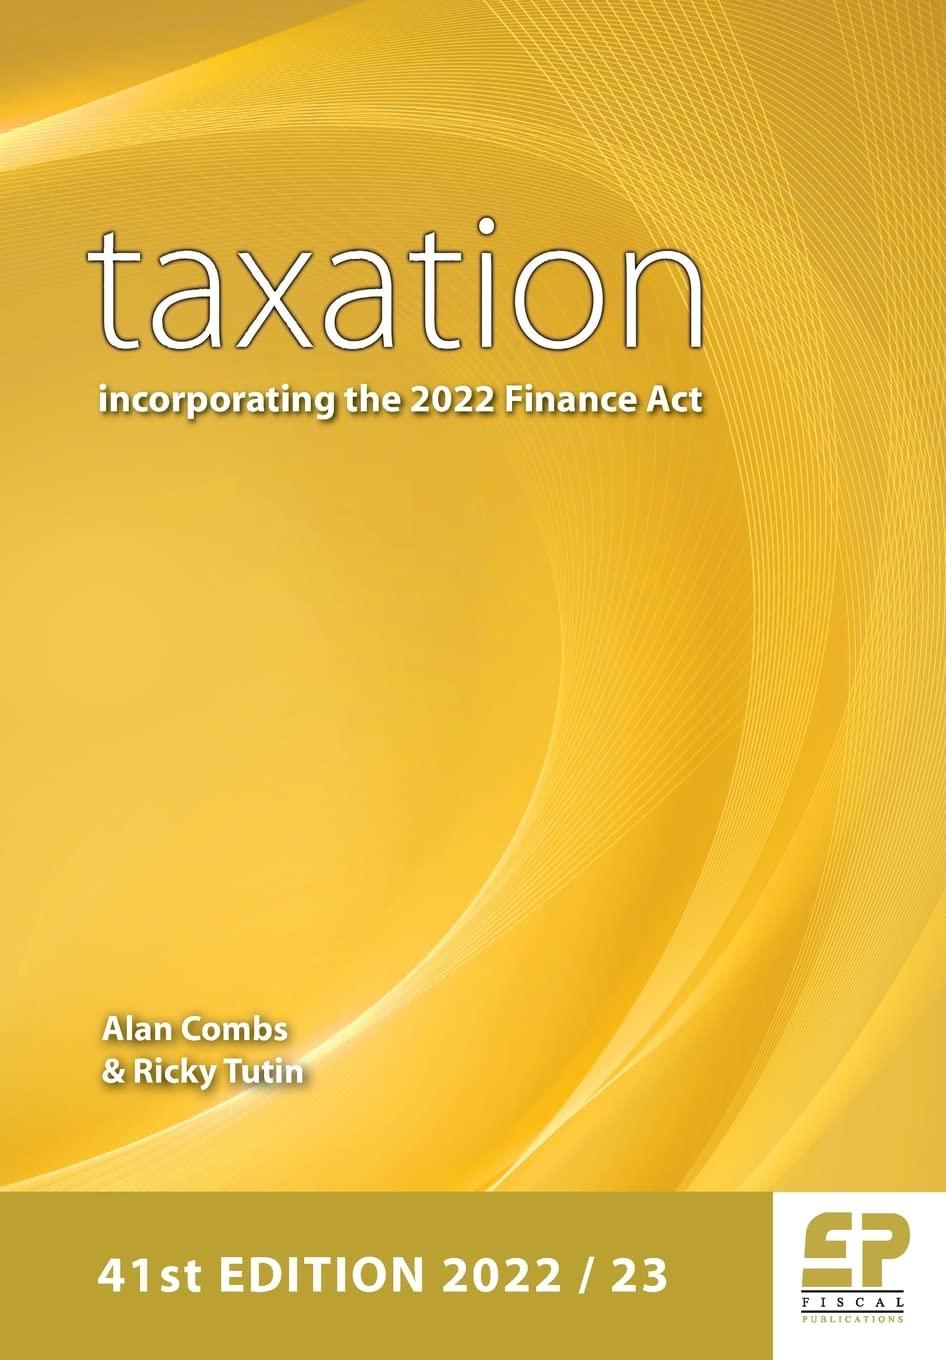 taxation incorporating the 2022 finance act 41st edition alan combs, ricky tutin 1906201676, 9781906201678